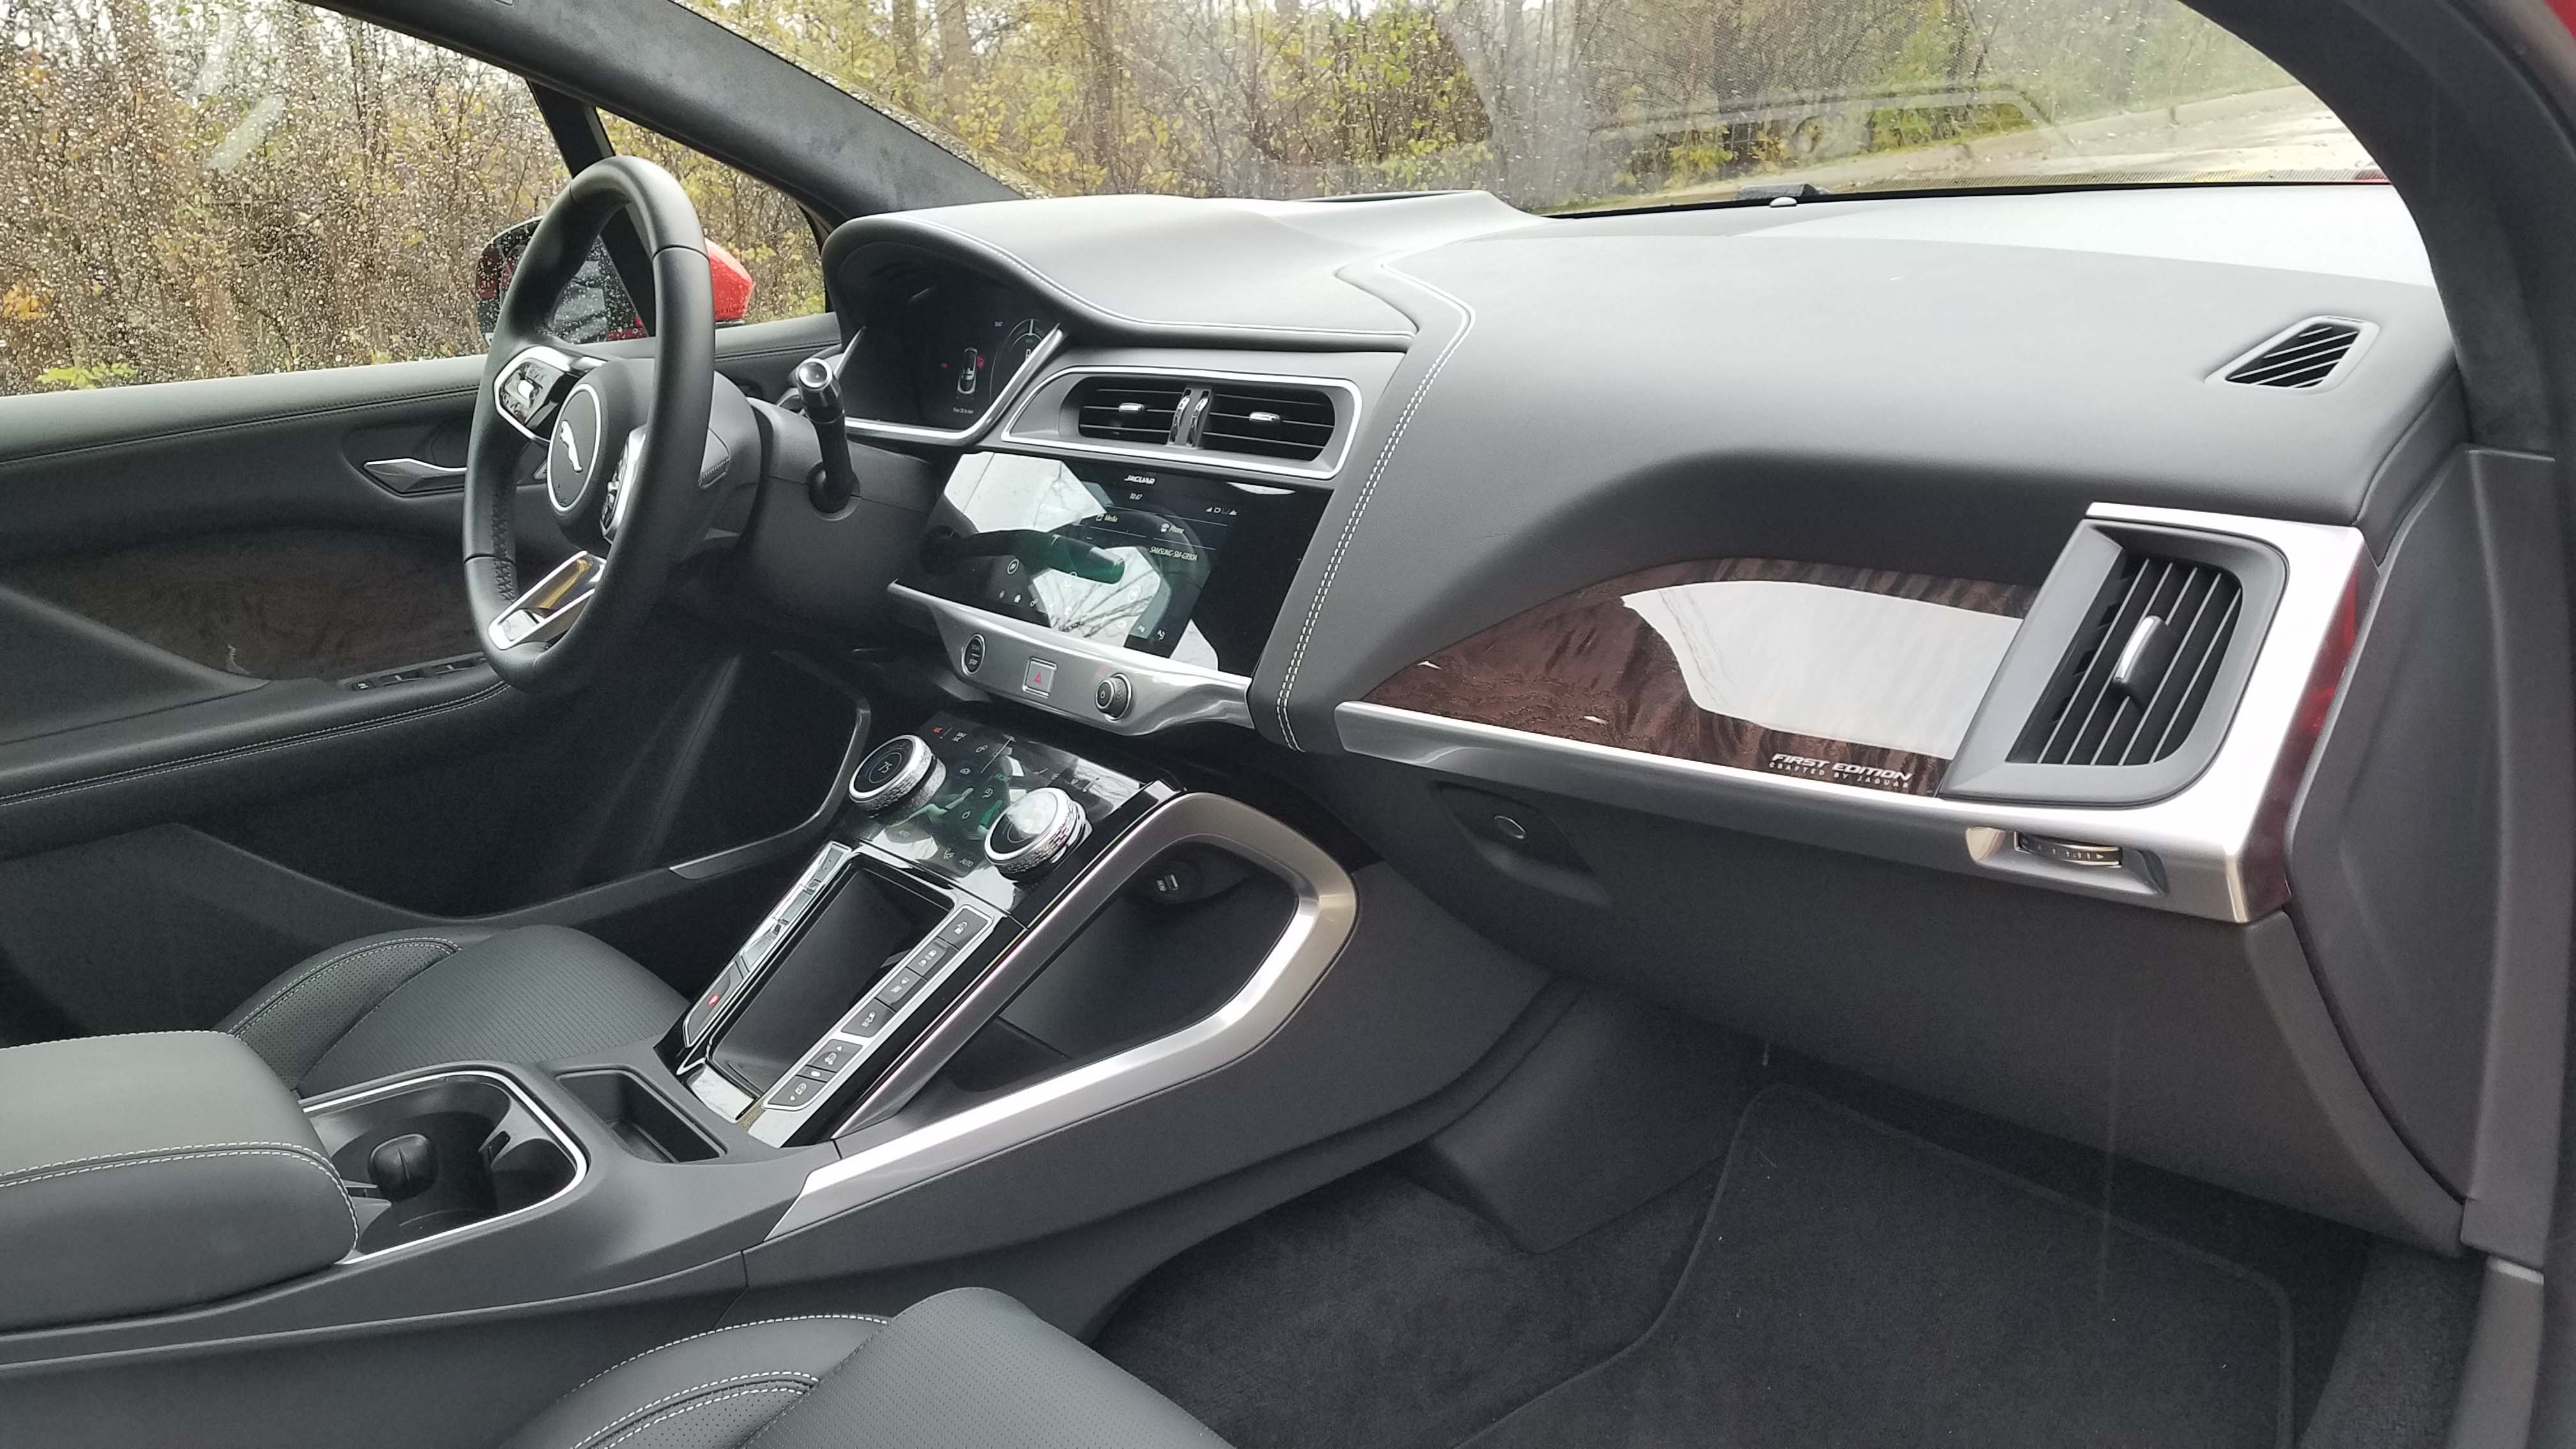 Compared to the Tesla Model 3, this Jaguar I-Pace interior seems conventional.